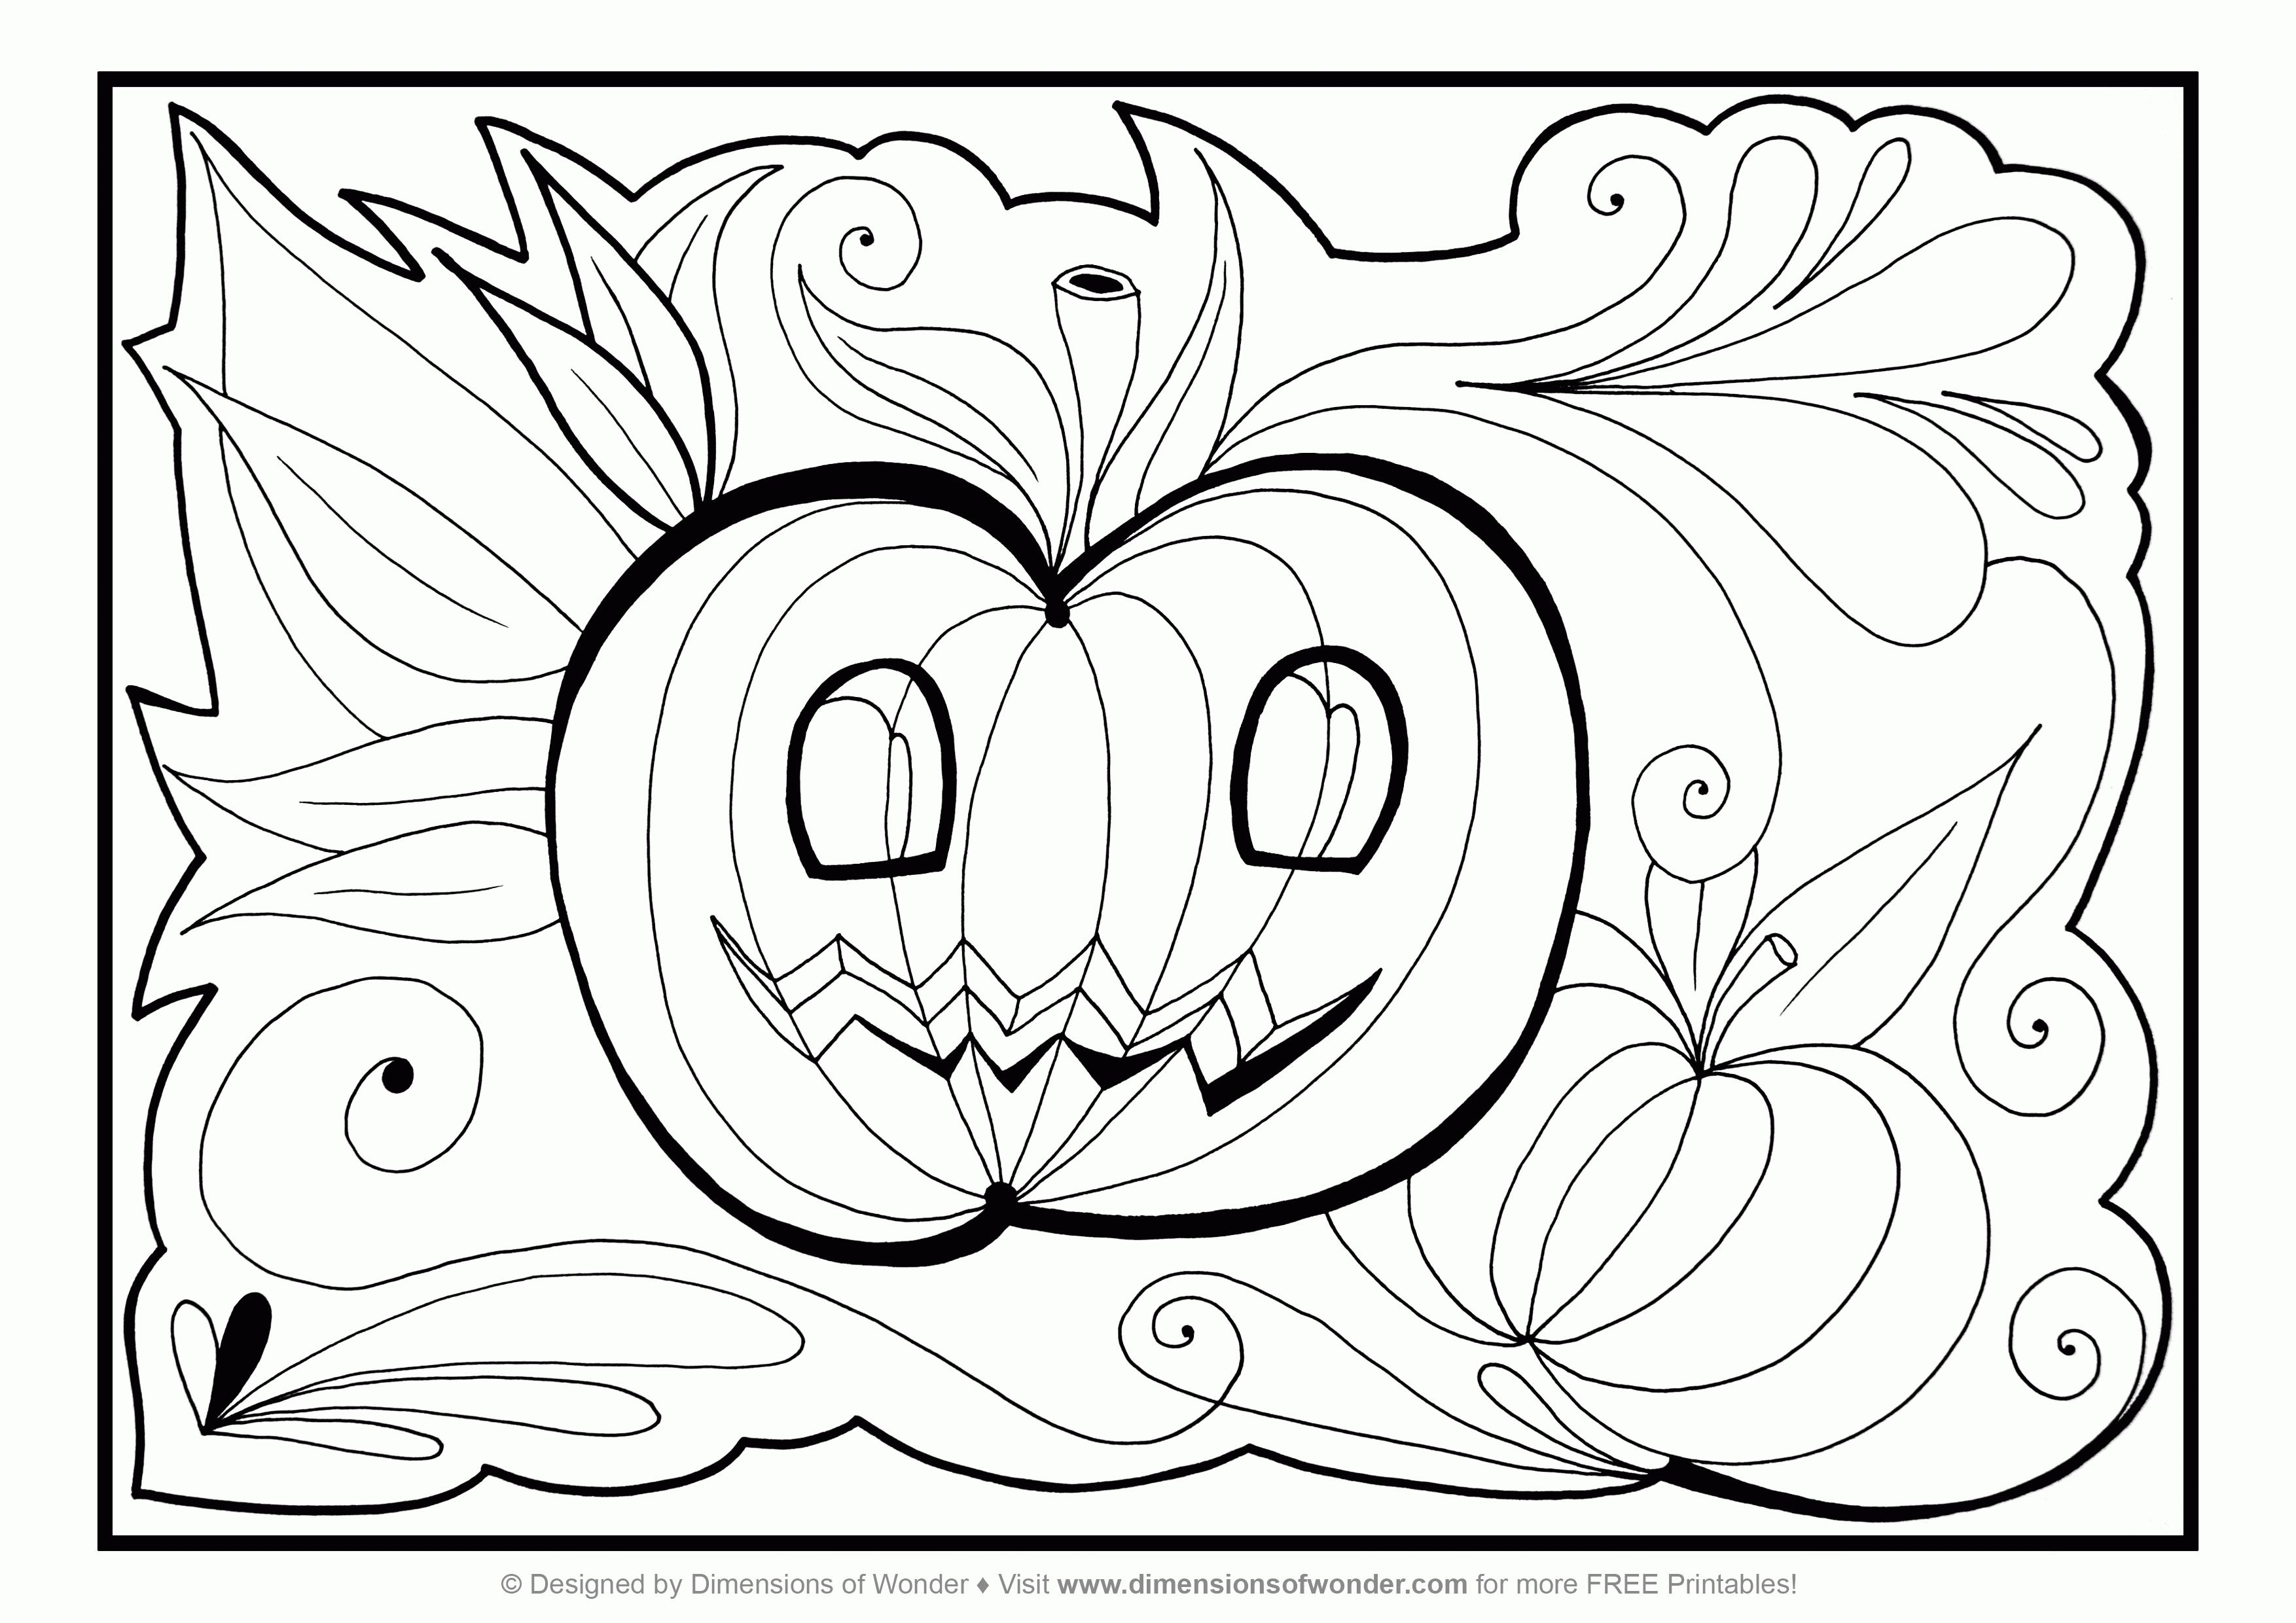 Halloween Coloring Pages Free Printable Halloween Coloring Sheets - Free Printable Halloween Coloring Pages